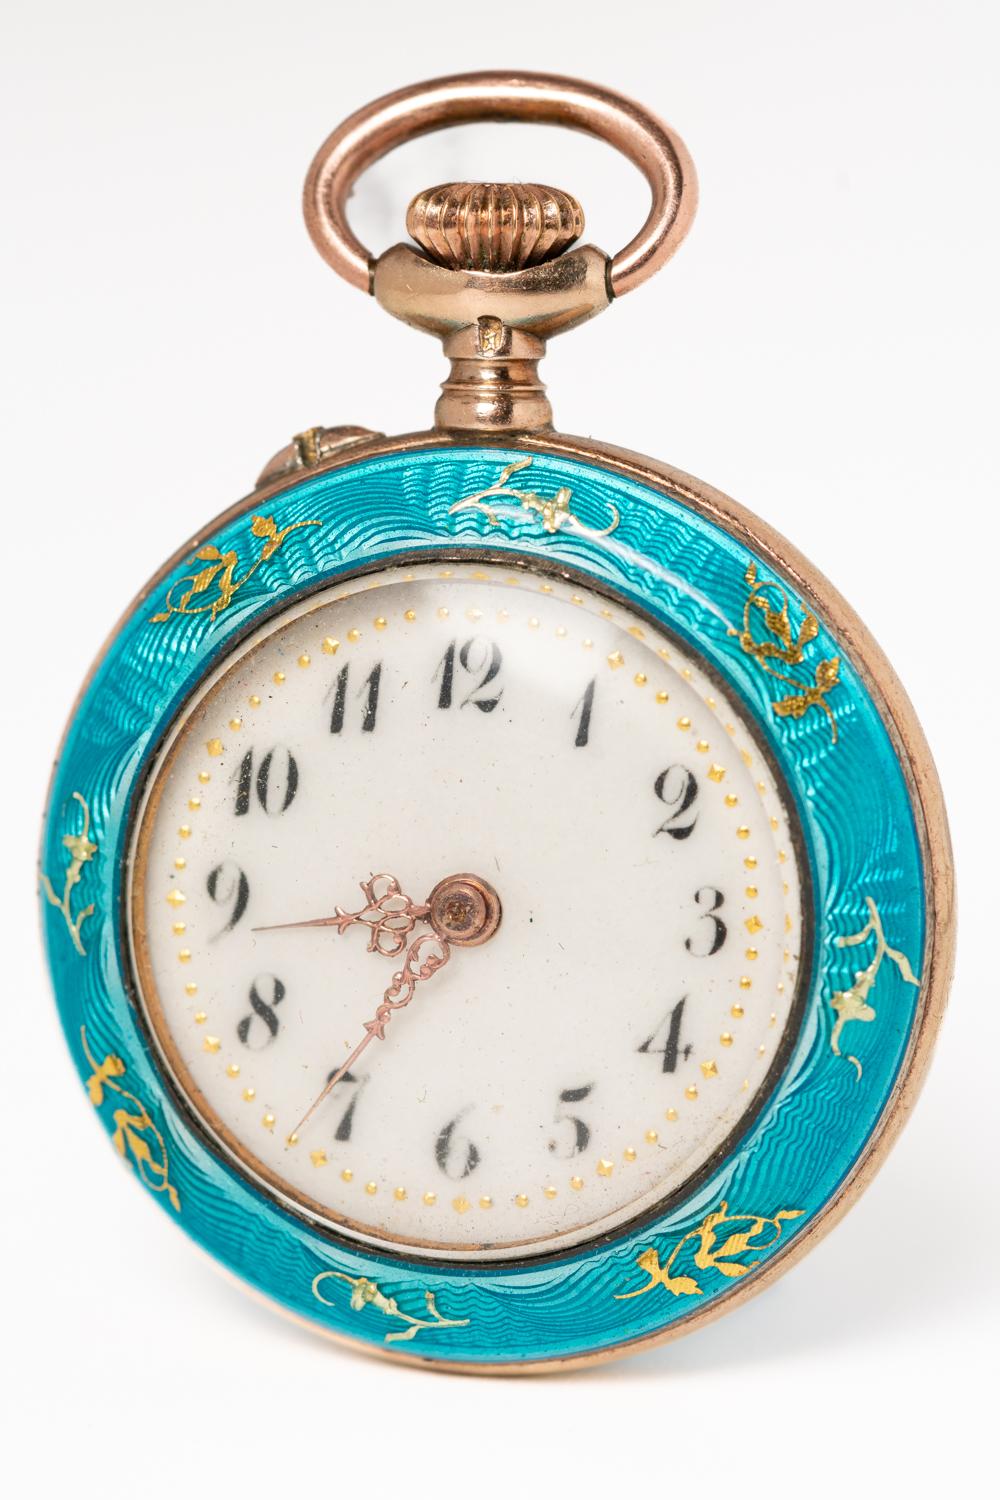 Antique Swiss Silver and Turquoise Guilloche Enamel Fauvette HAD Pocket Watch  In Excellent Condition For Sale In Portland, England